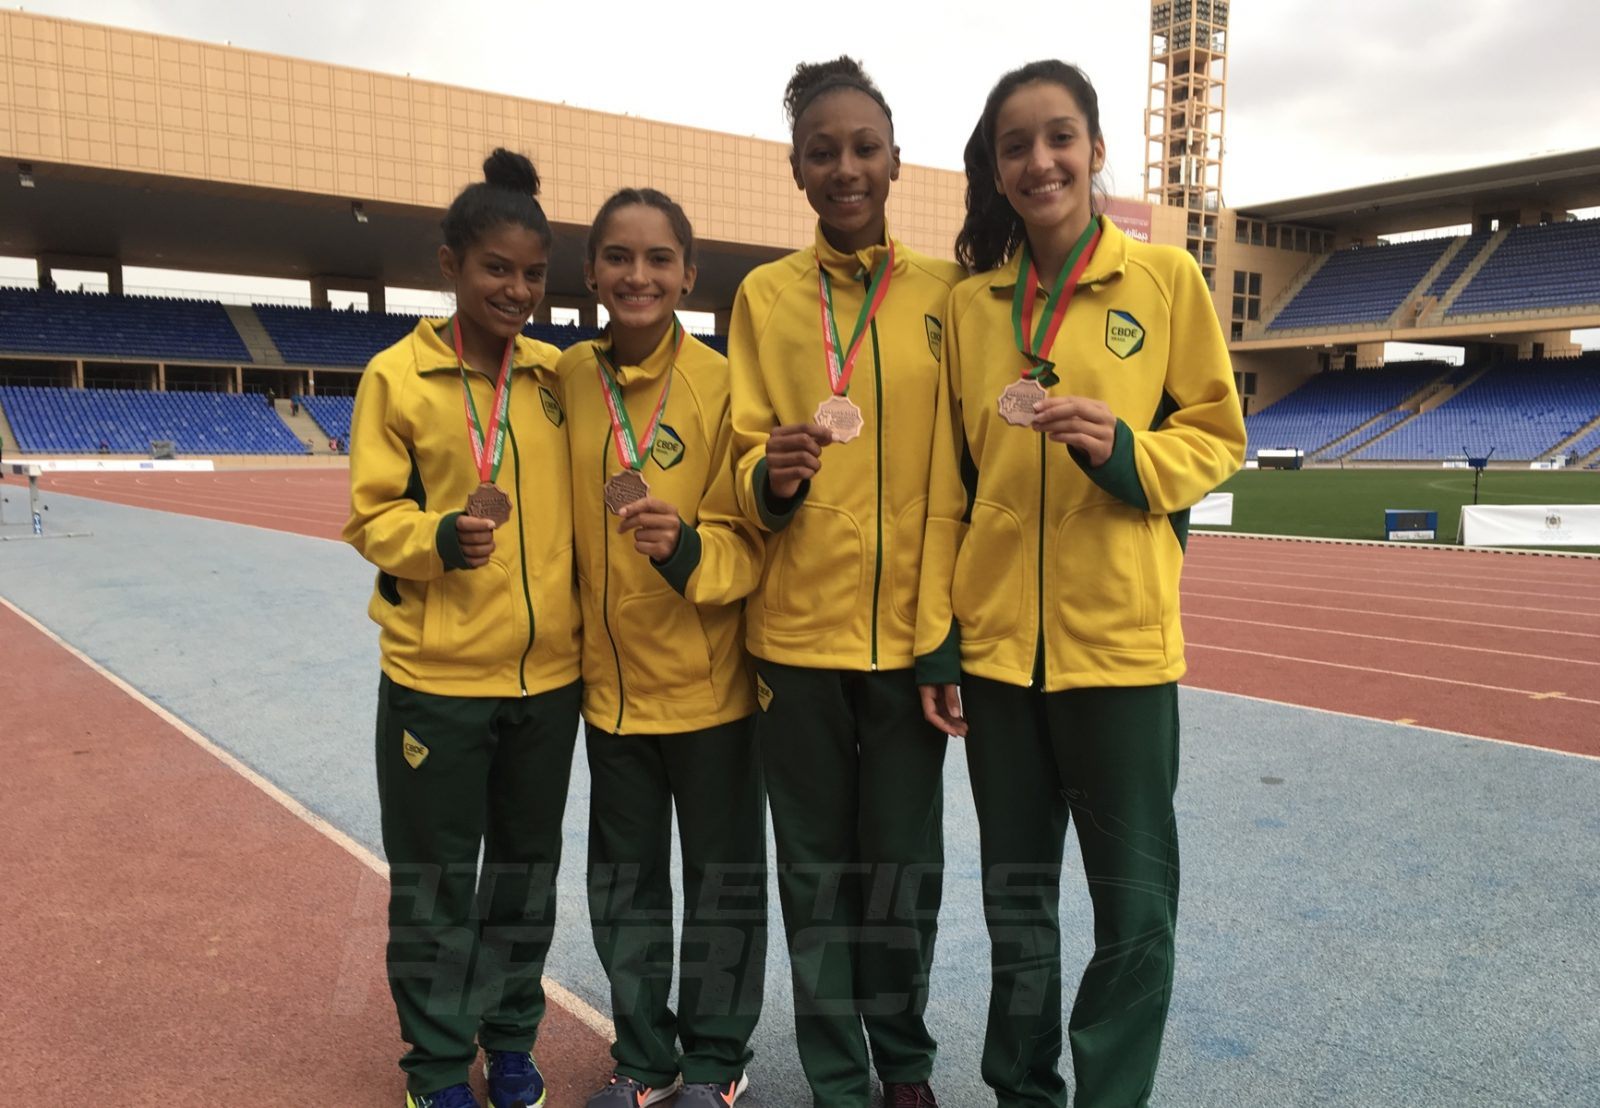 The Brazilian team after the Girls 4x400m Relays medal presentation at Gymnasiade 2018 in Marrakech / Photo Credit: Yomi Omogbeja